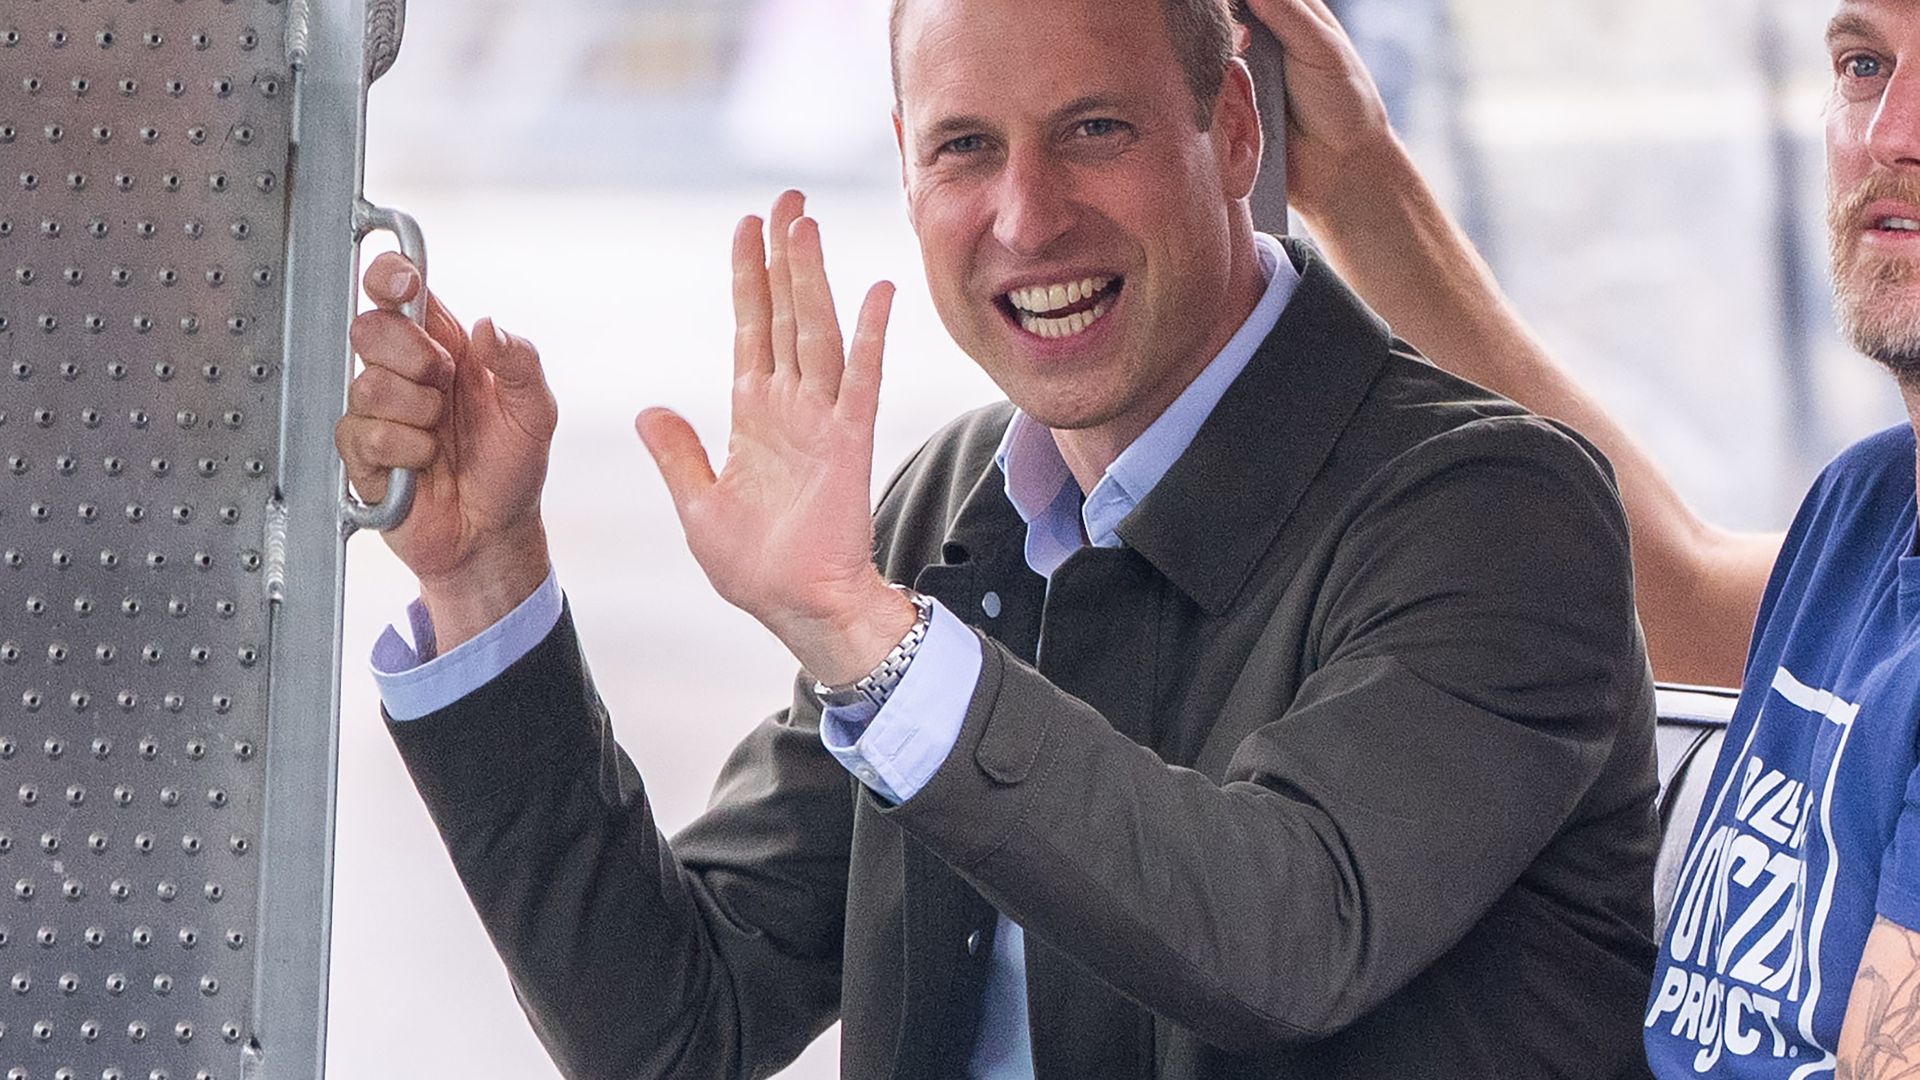 Awestruck NYC students share 'incredible' interaction with Prince William